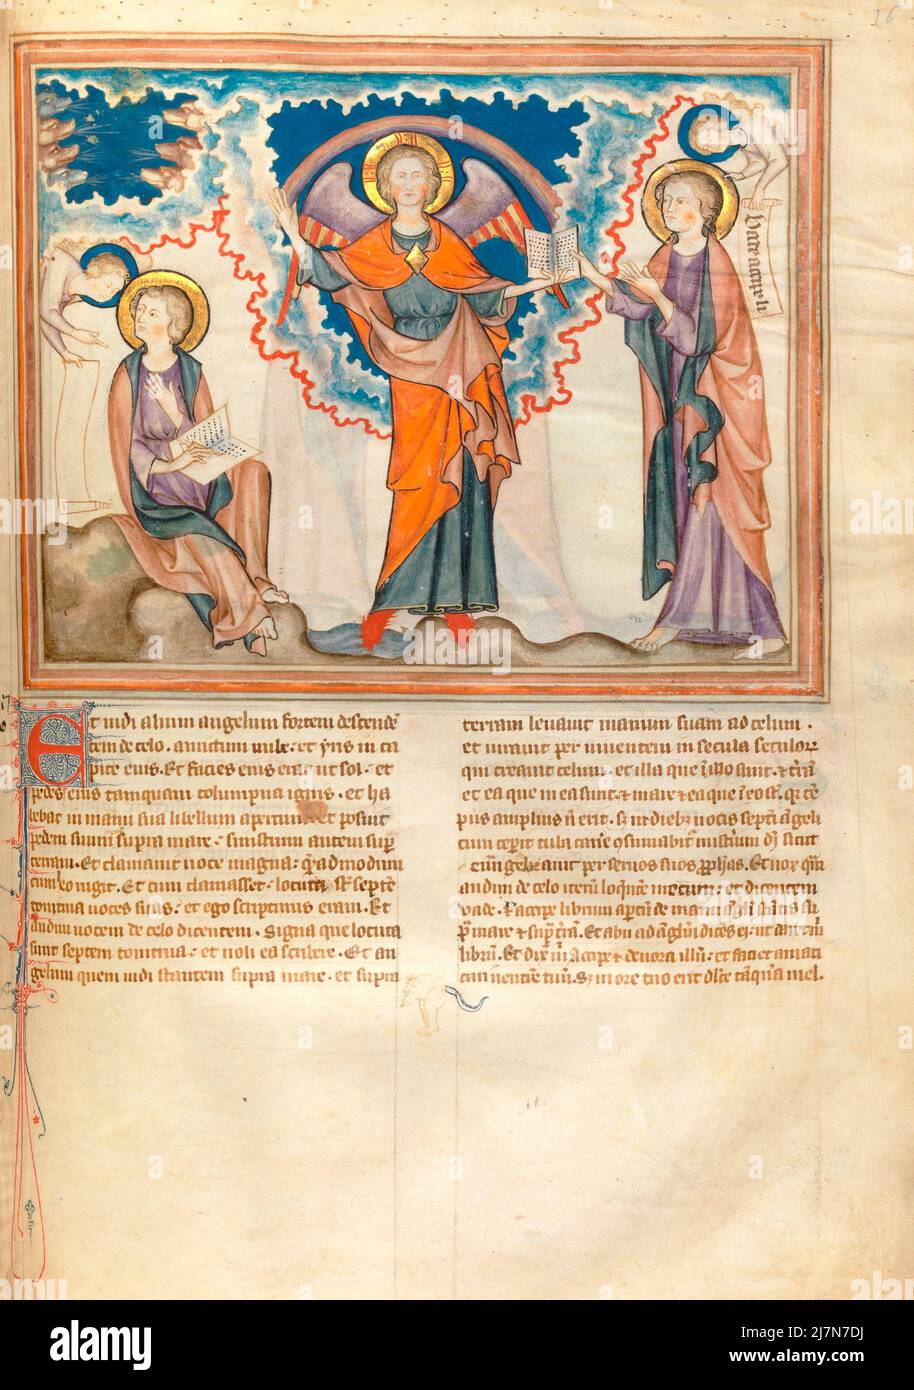 The Cloisters Apocalypse ca. 1330  - The Apocalypse, or Book of Revelation,  John the Evangelist , giovanni evangelista, during his exile on the Greek island of Patmos. In this Image - The Angel with the Book Stock Photo